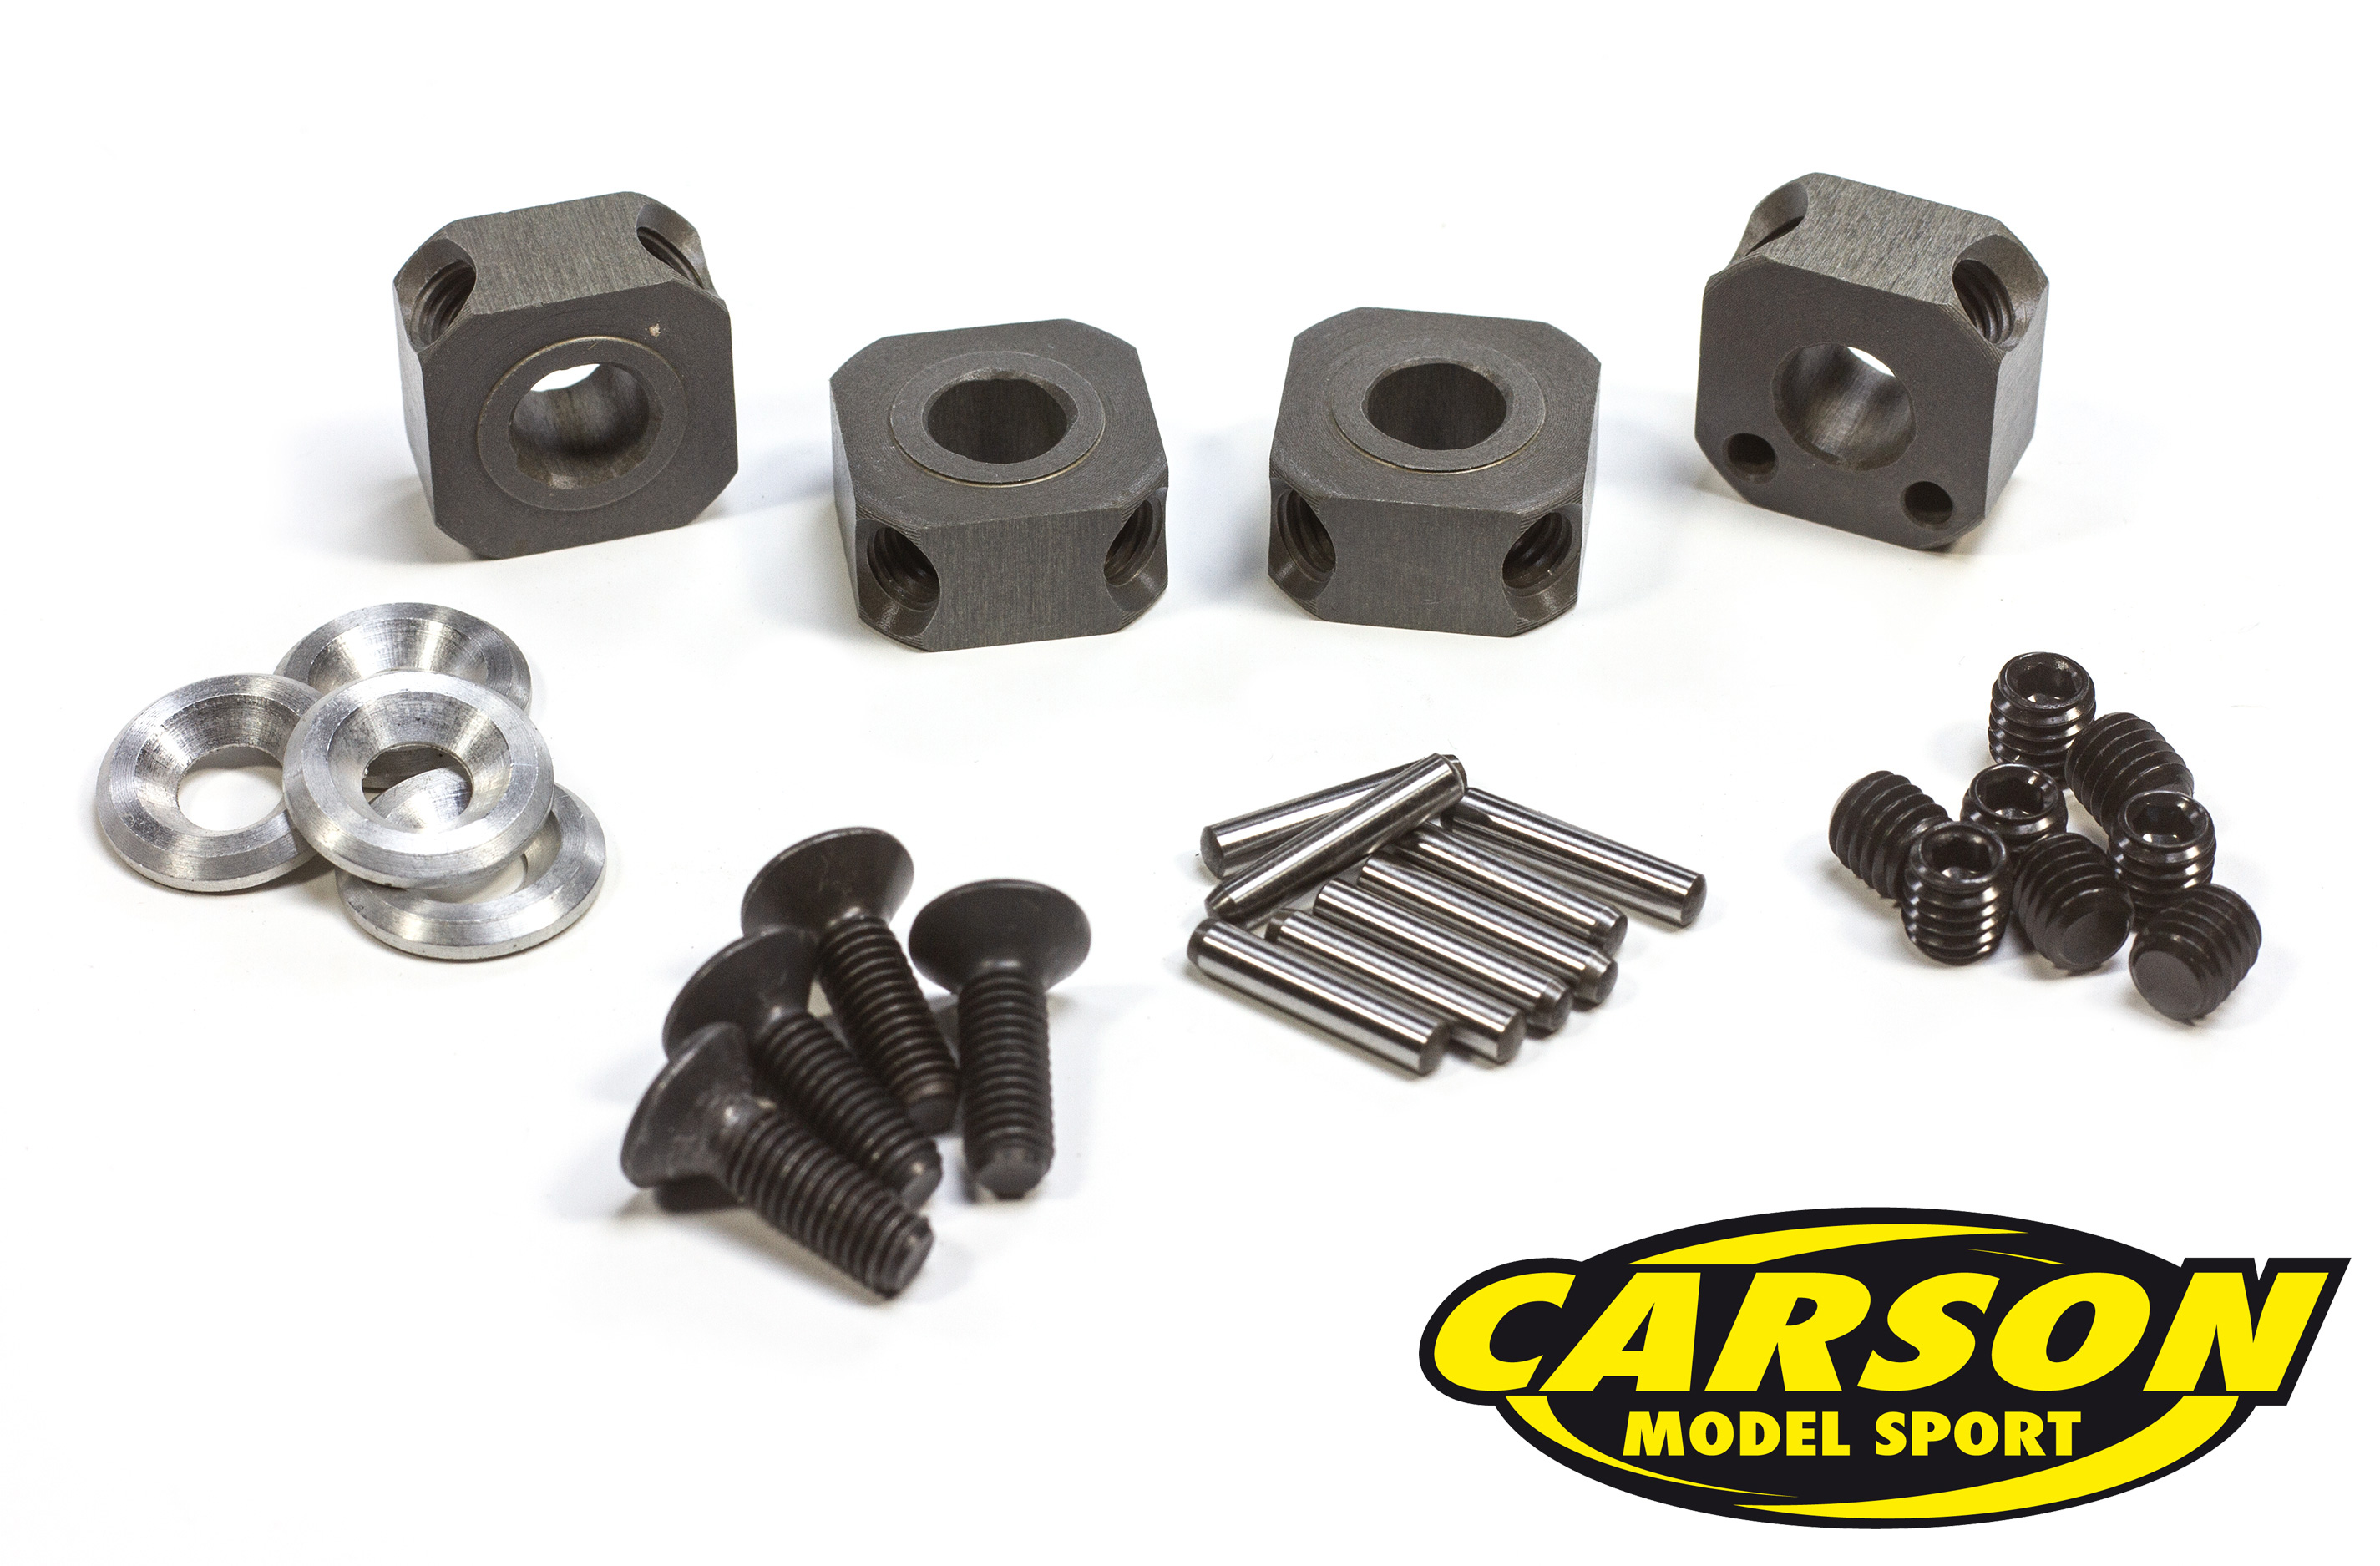 TT1051 Top Tuning Conversion kit for the standard 1:/5 18 mm square wheel drives for the Carson CY-Eline cars